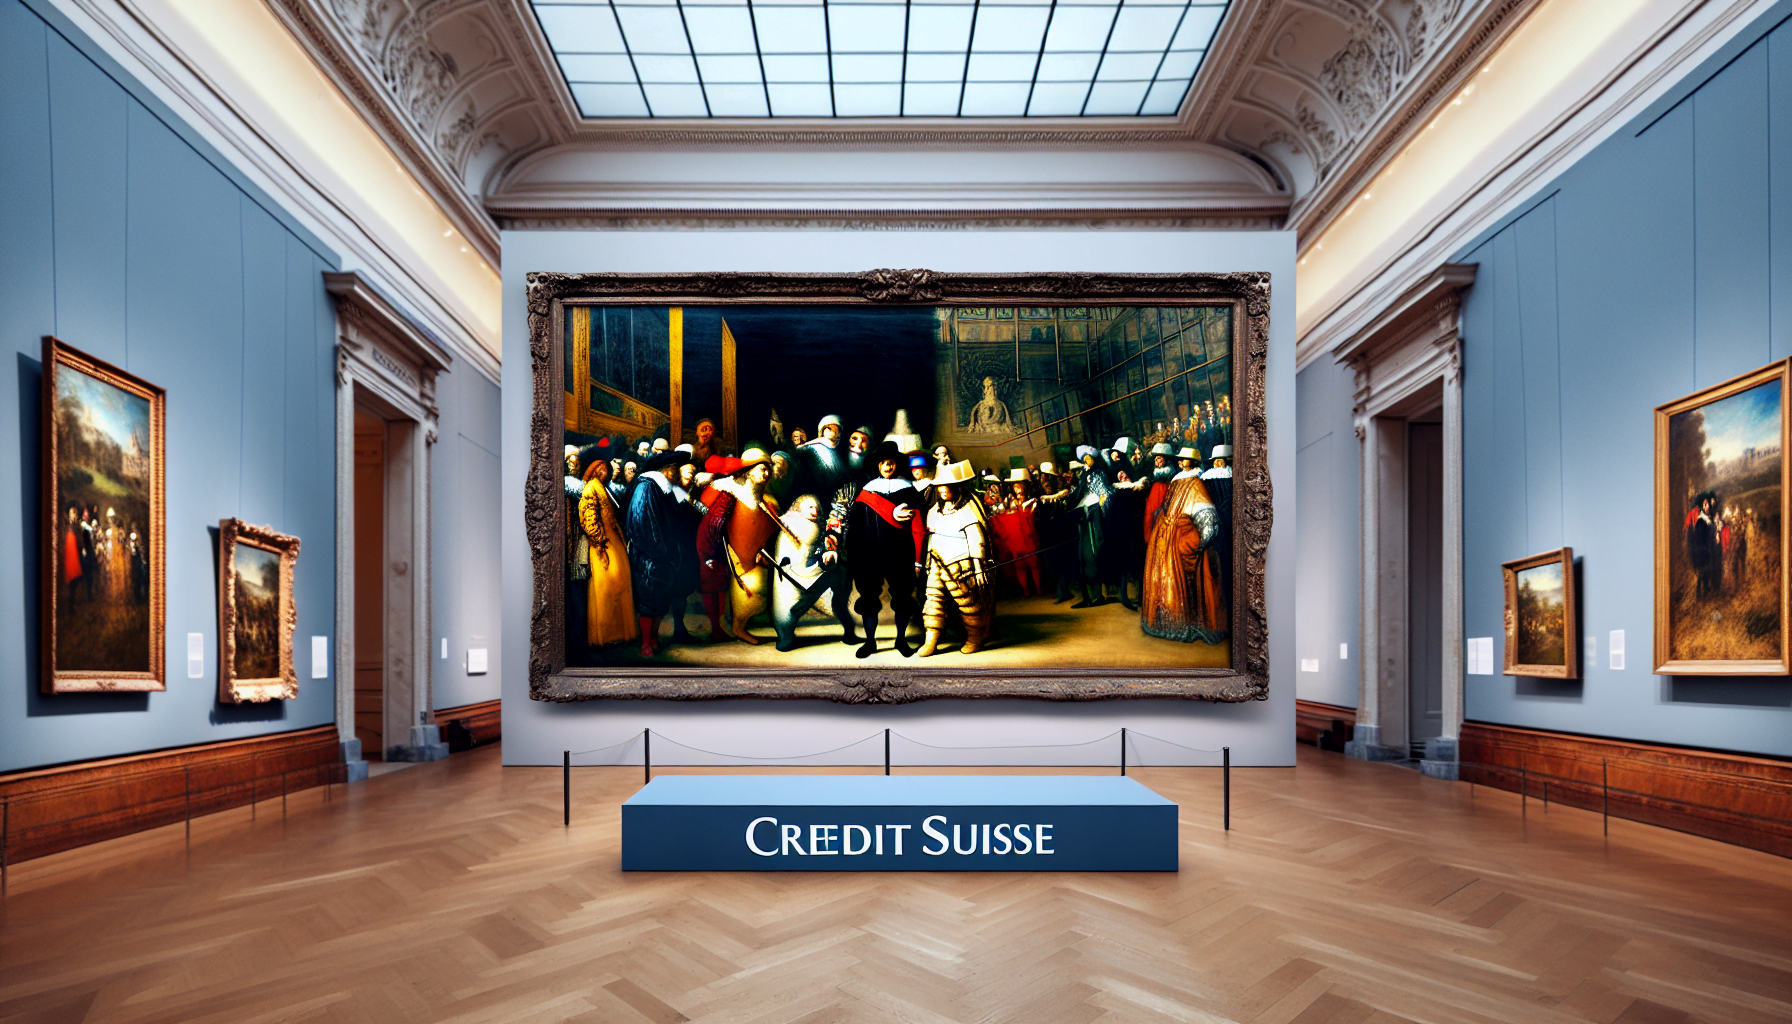 The Credit Suisse Exhibition: Frans Hals at the National Gallery